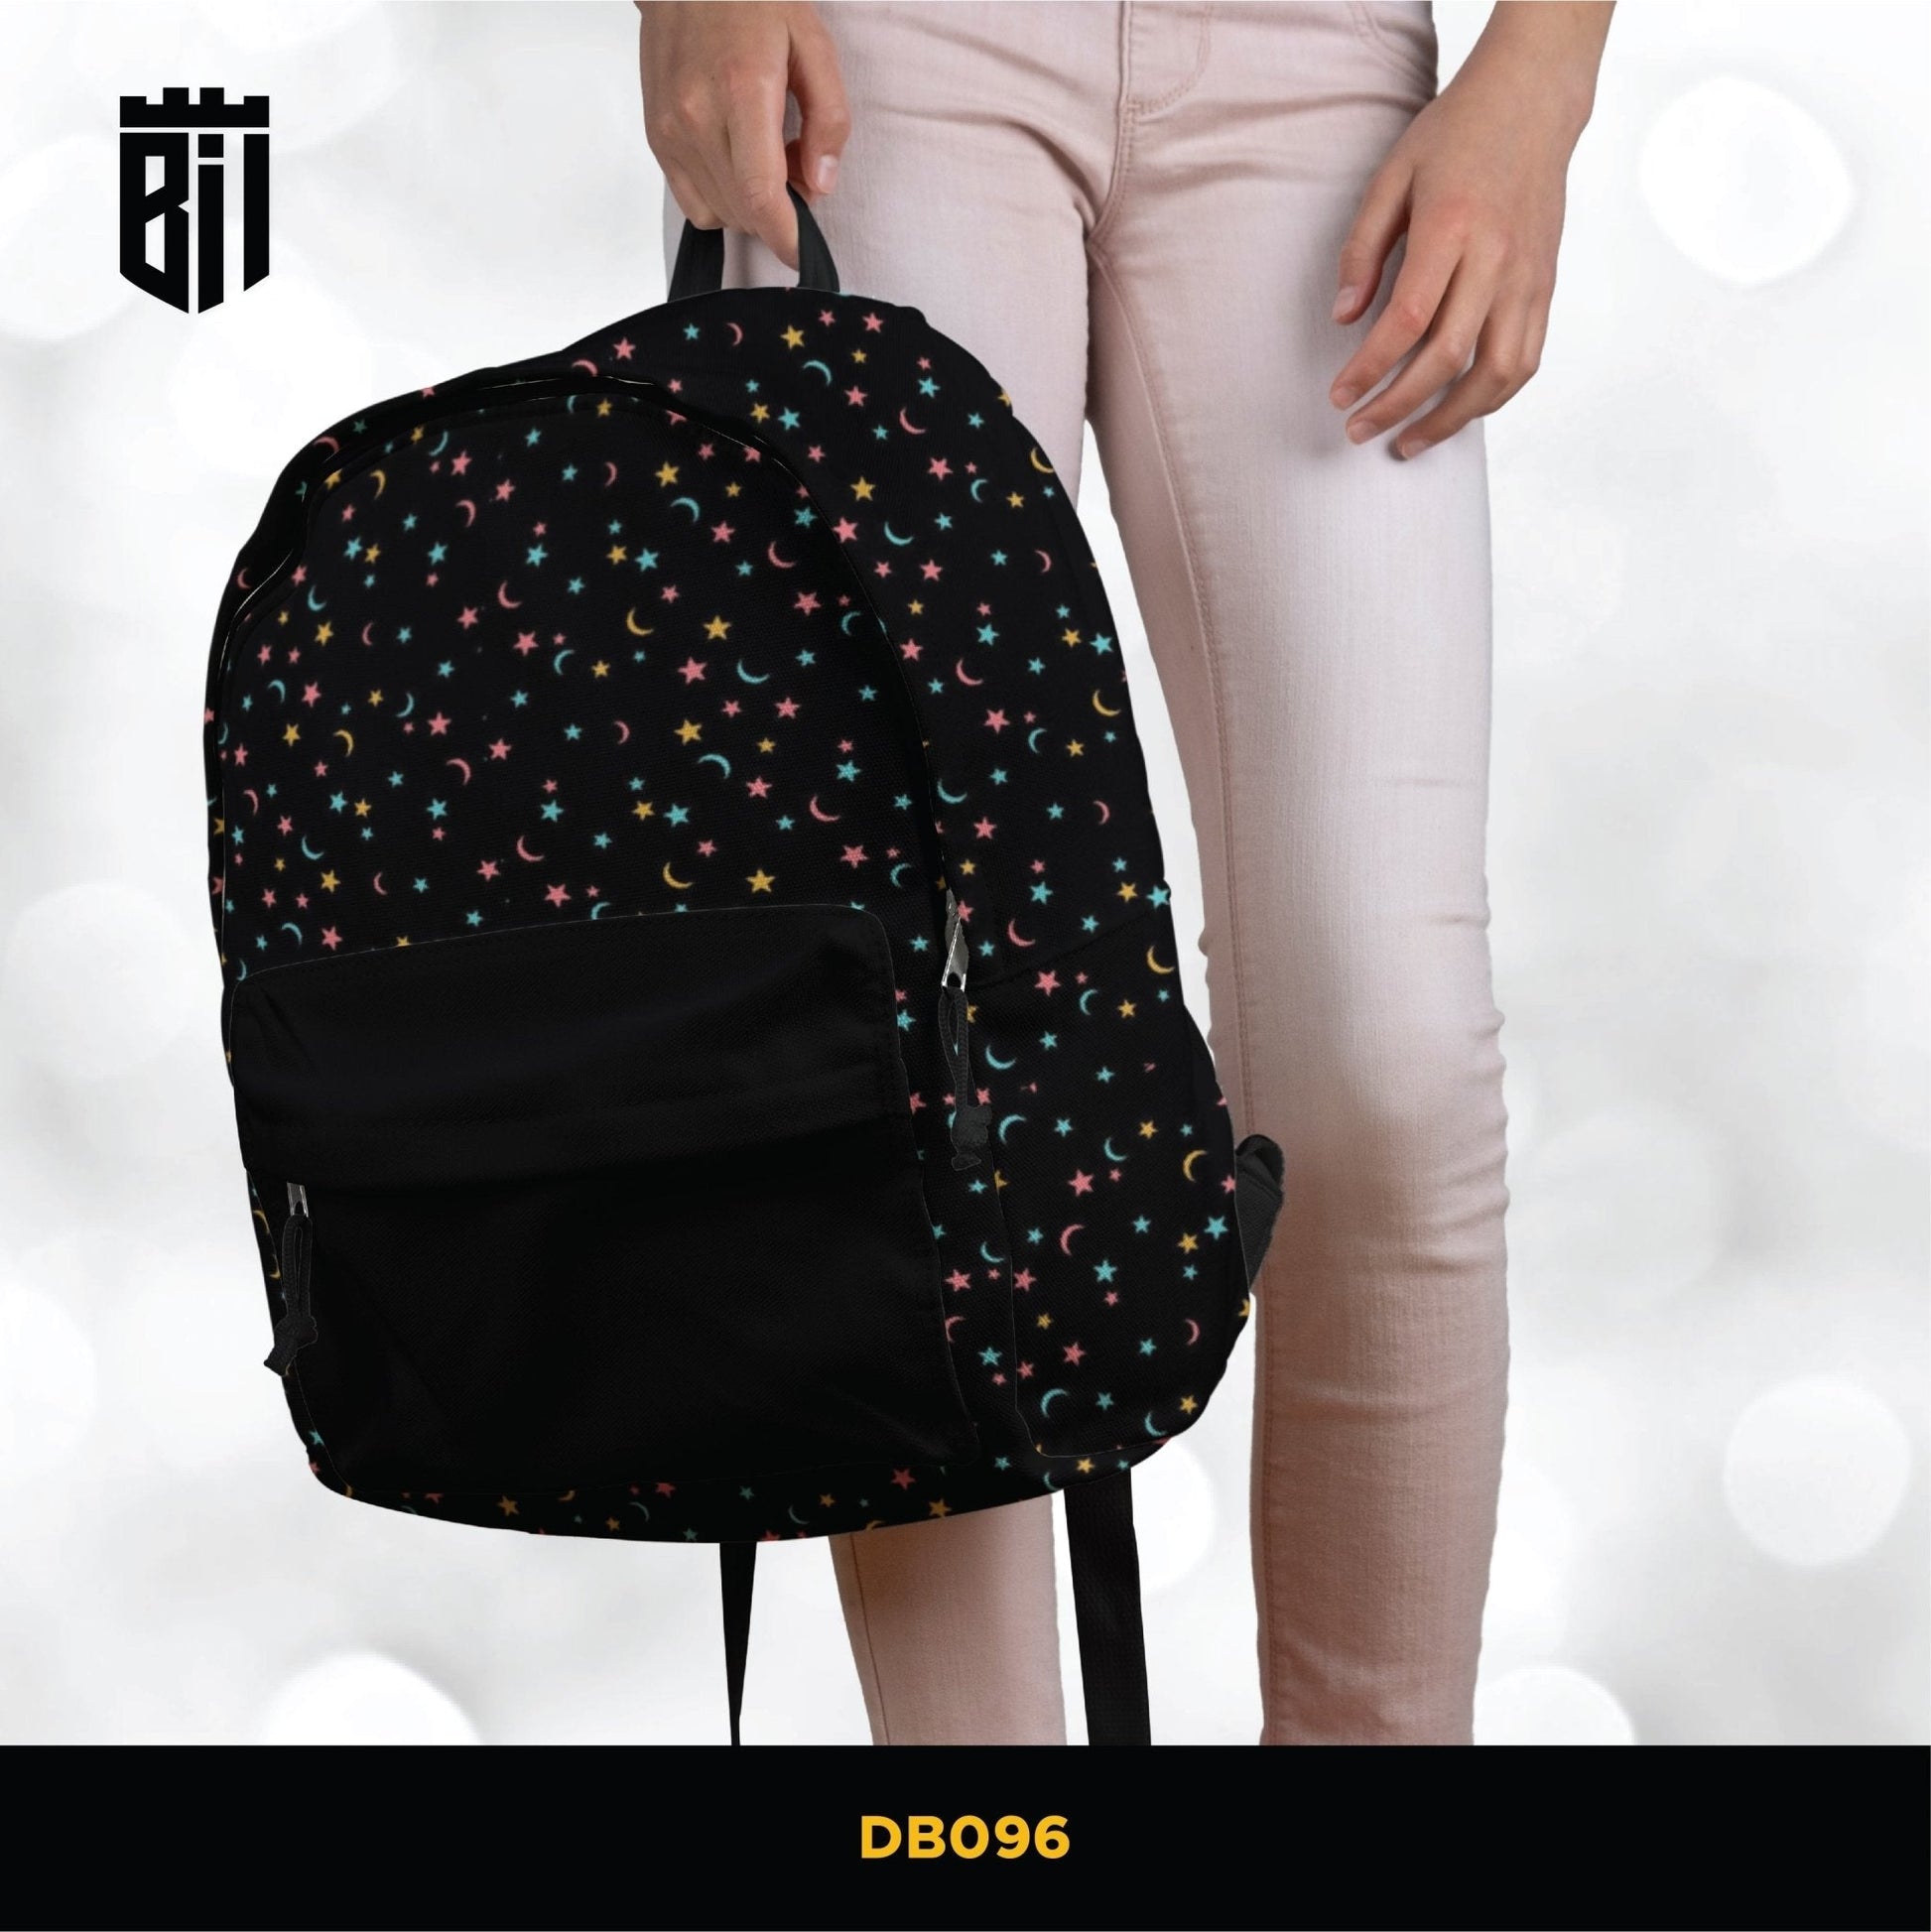 DB096 Galaxy Allover Printed Backpack - BREACHIT